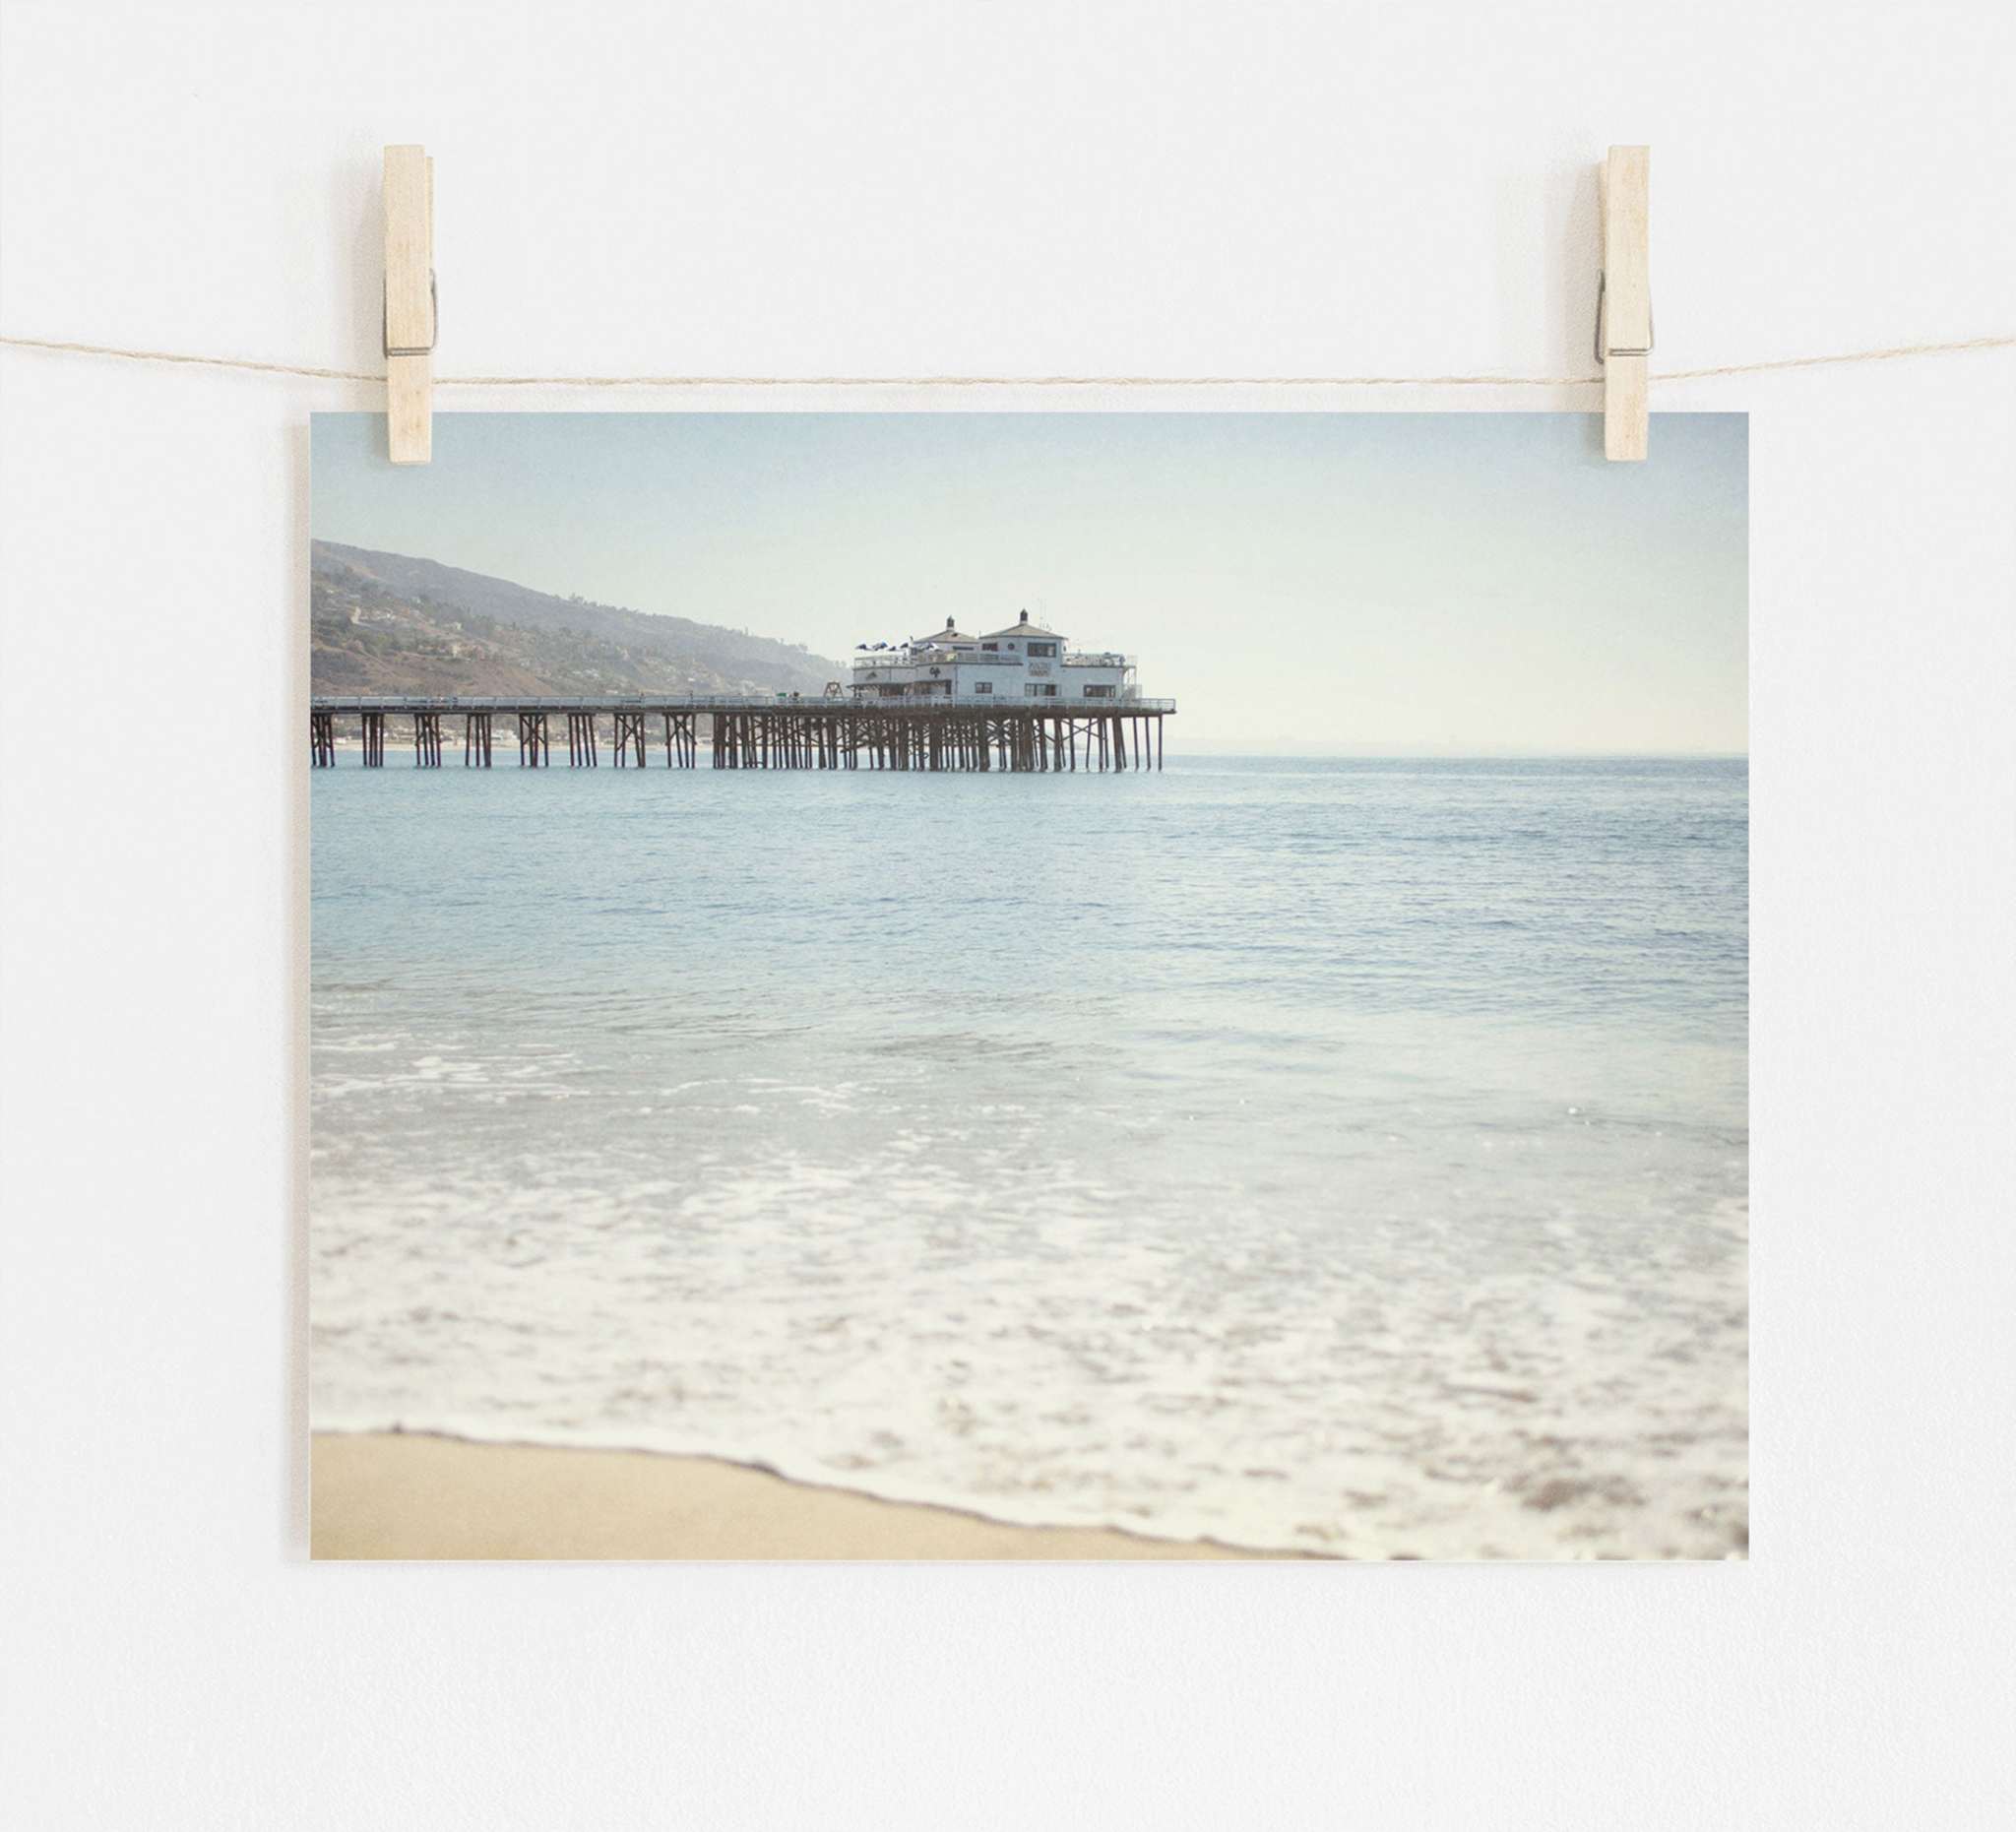 A photograph of Offley Green's 'Malibu Pier' California Beach Print extending into the ocean, pinned by wooden clothespins onto a string against a white wall. The calm sea and clear sky create a serene backdrop.